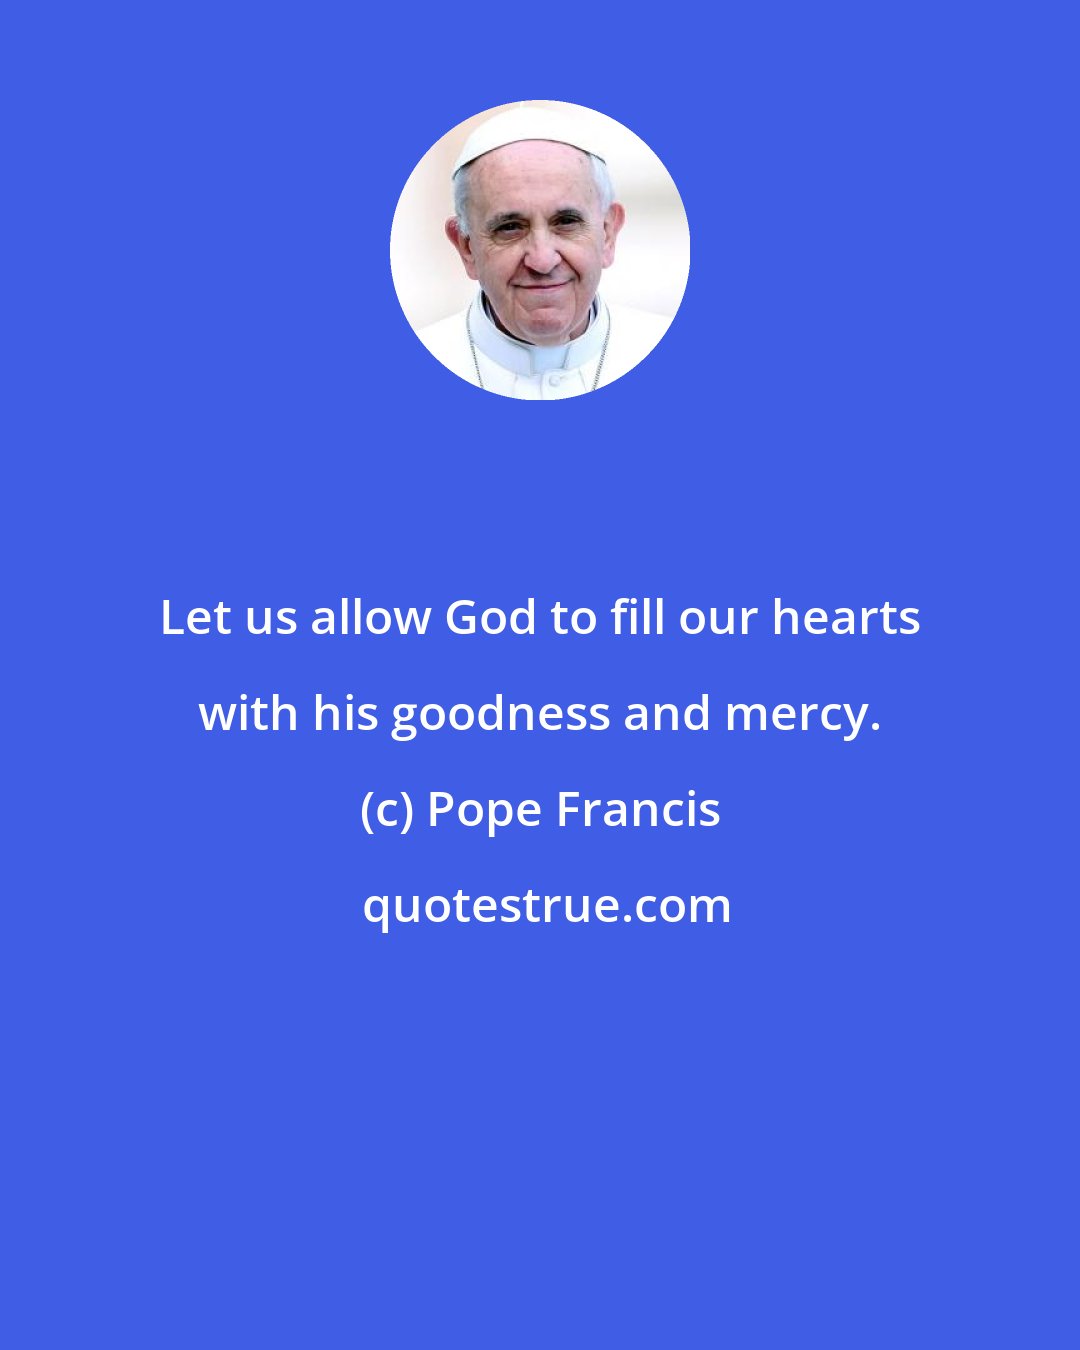 Pope Francis: Let us allow God to fill our hearts with his goodness and mercy.